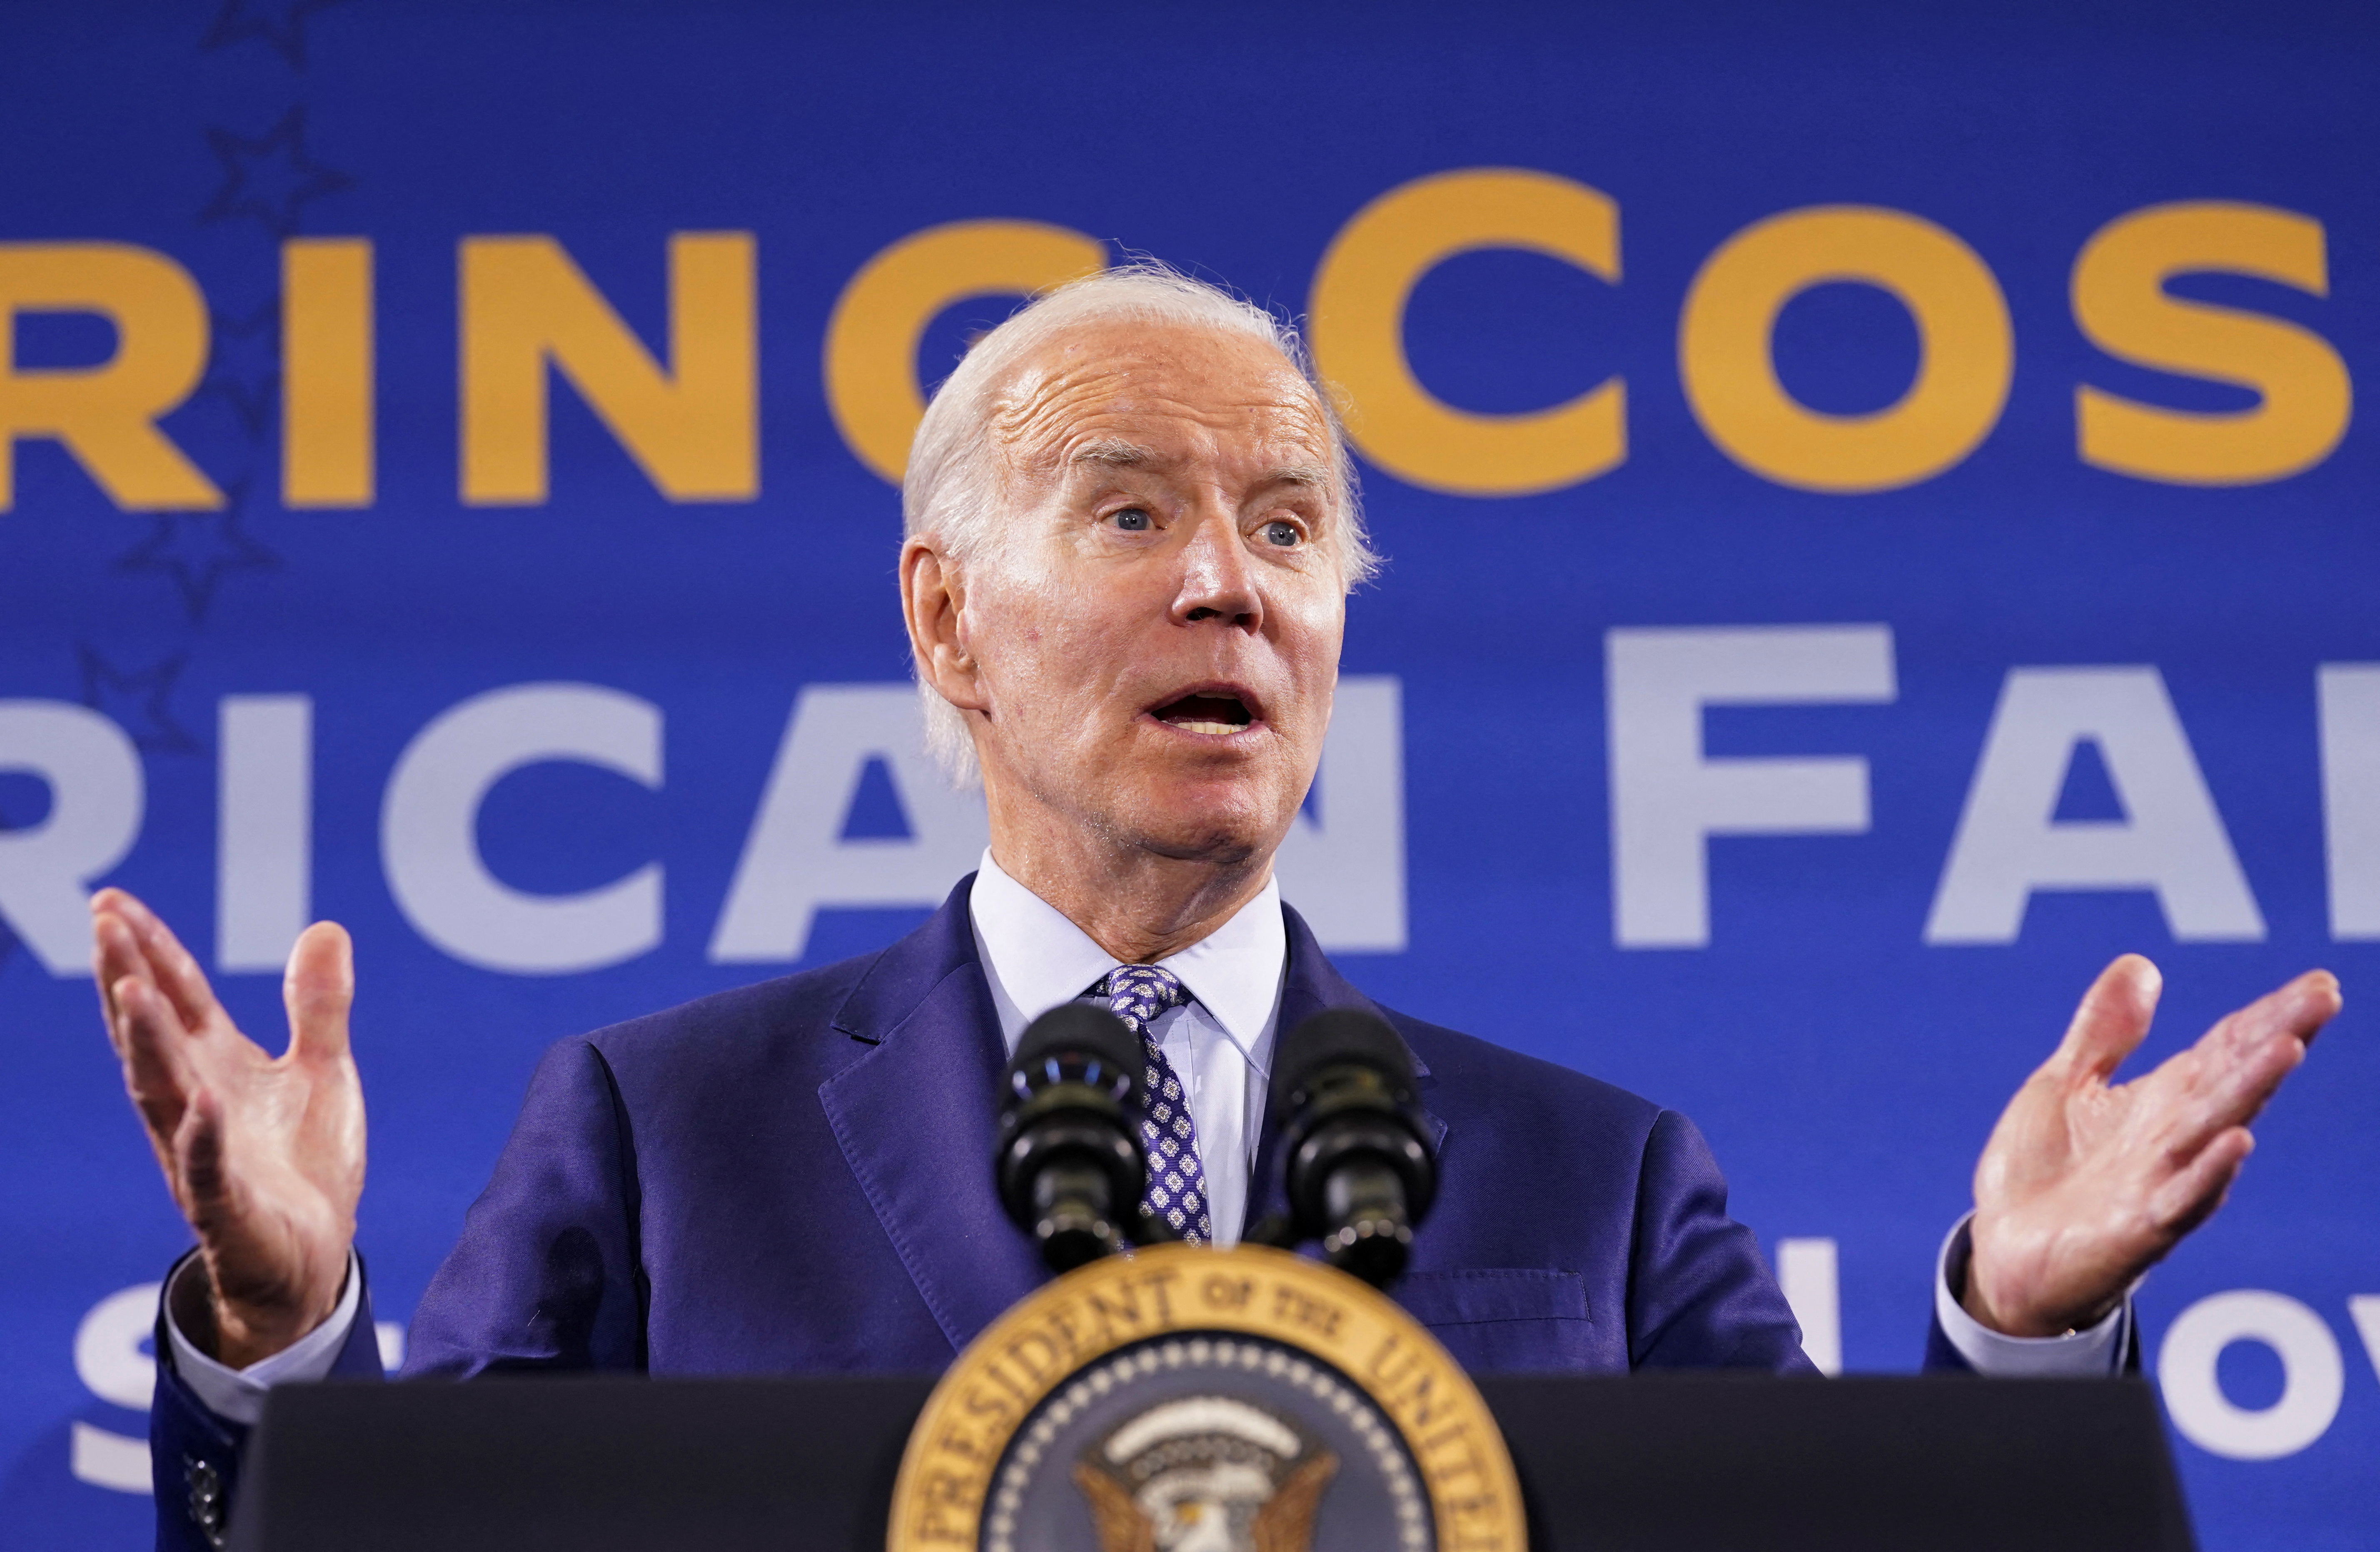 U.S. President Joe Biden campaigns ahead of midterm elections in New Mexico